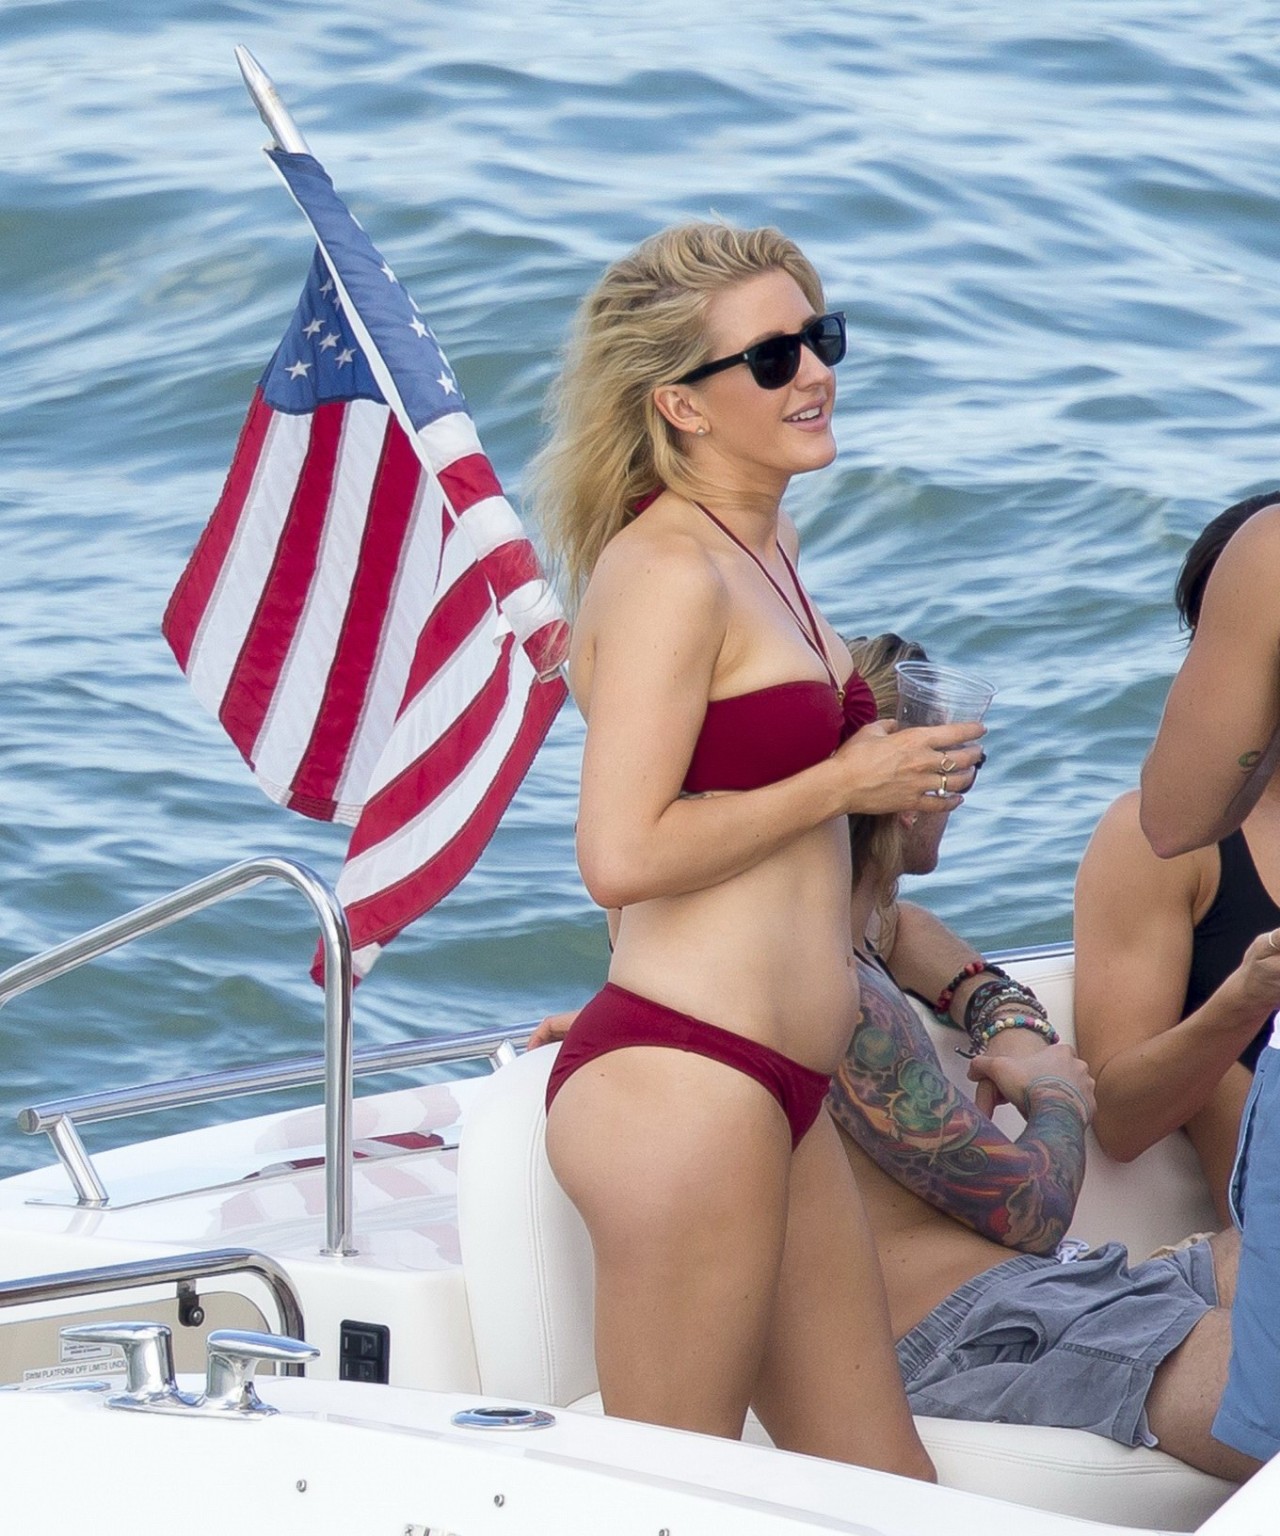 Ellie Goulding showing her ass in skimpy cherry colored bikini at the boat in Mi #75177087